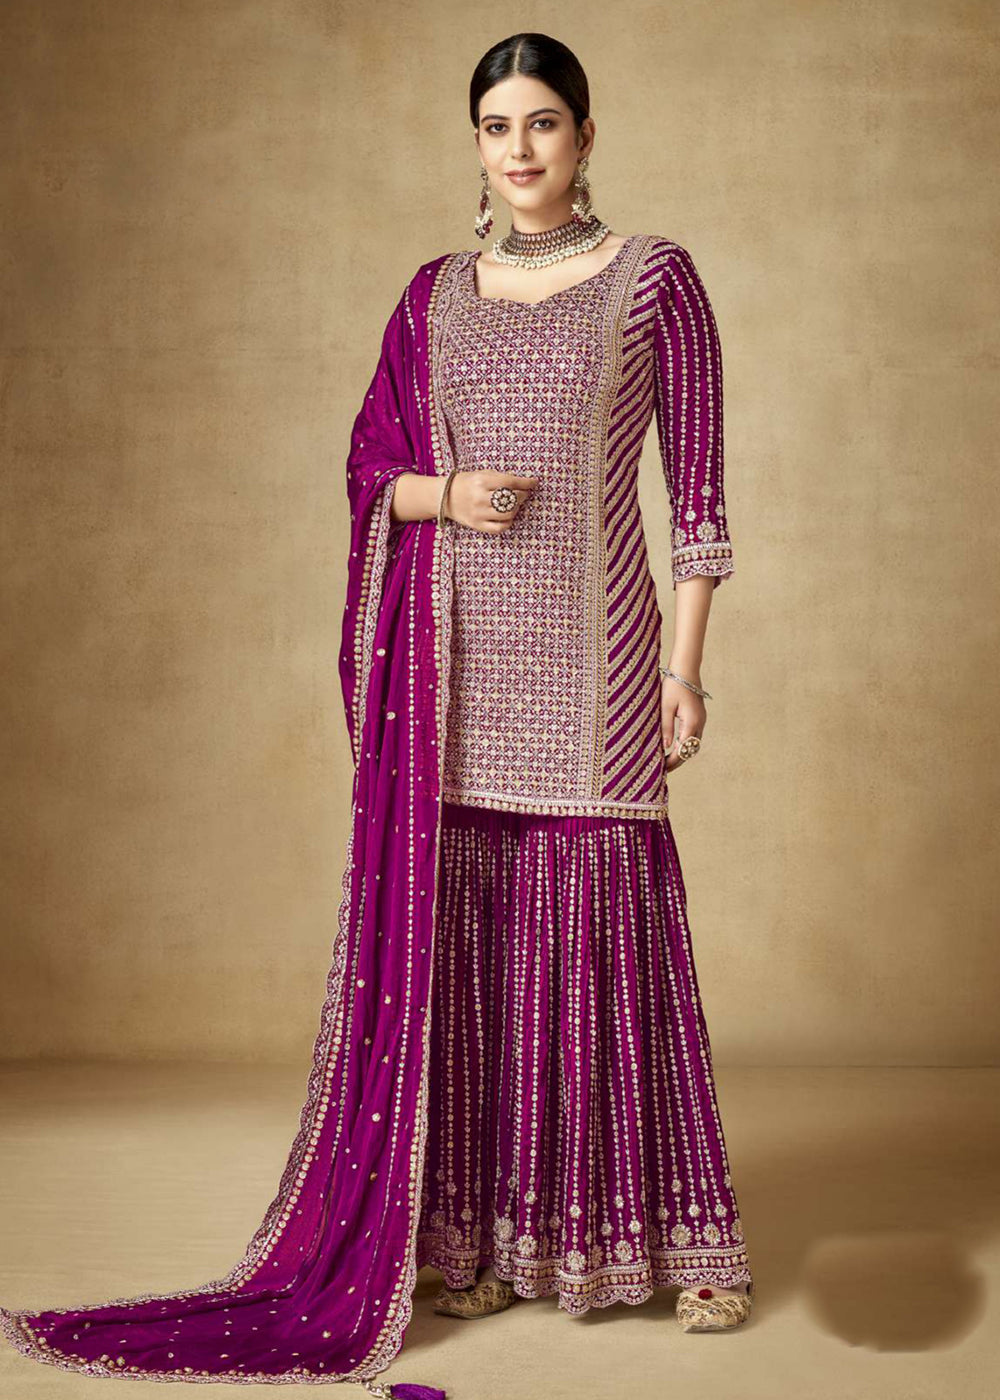 Shop Now Alluring Magenta Purple Zari & Sequins Embroidered Gharara Suit Online at Empress Clothing in USA, UK, Canada, Italy & Worldwide.